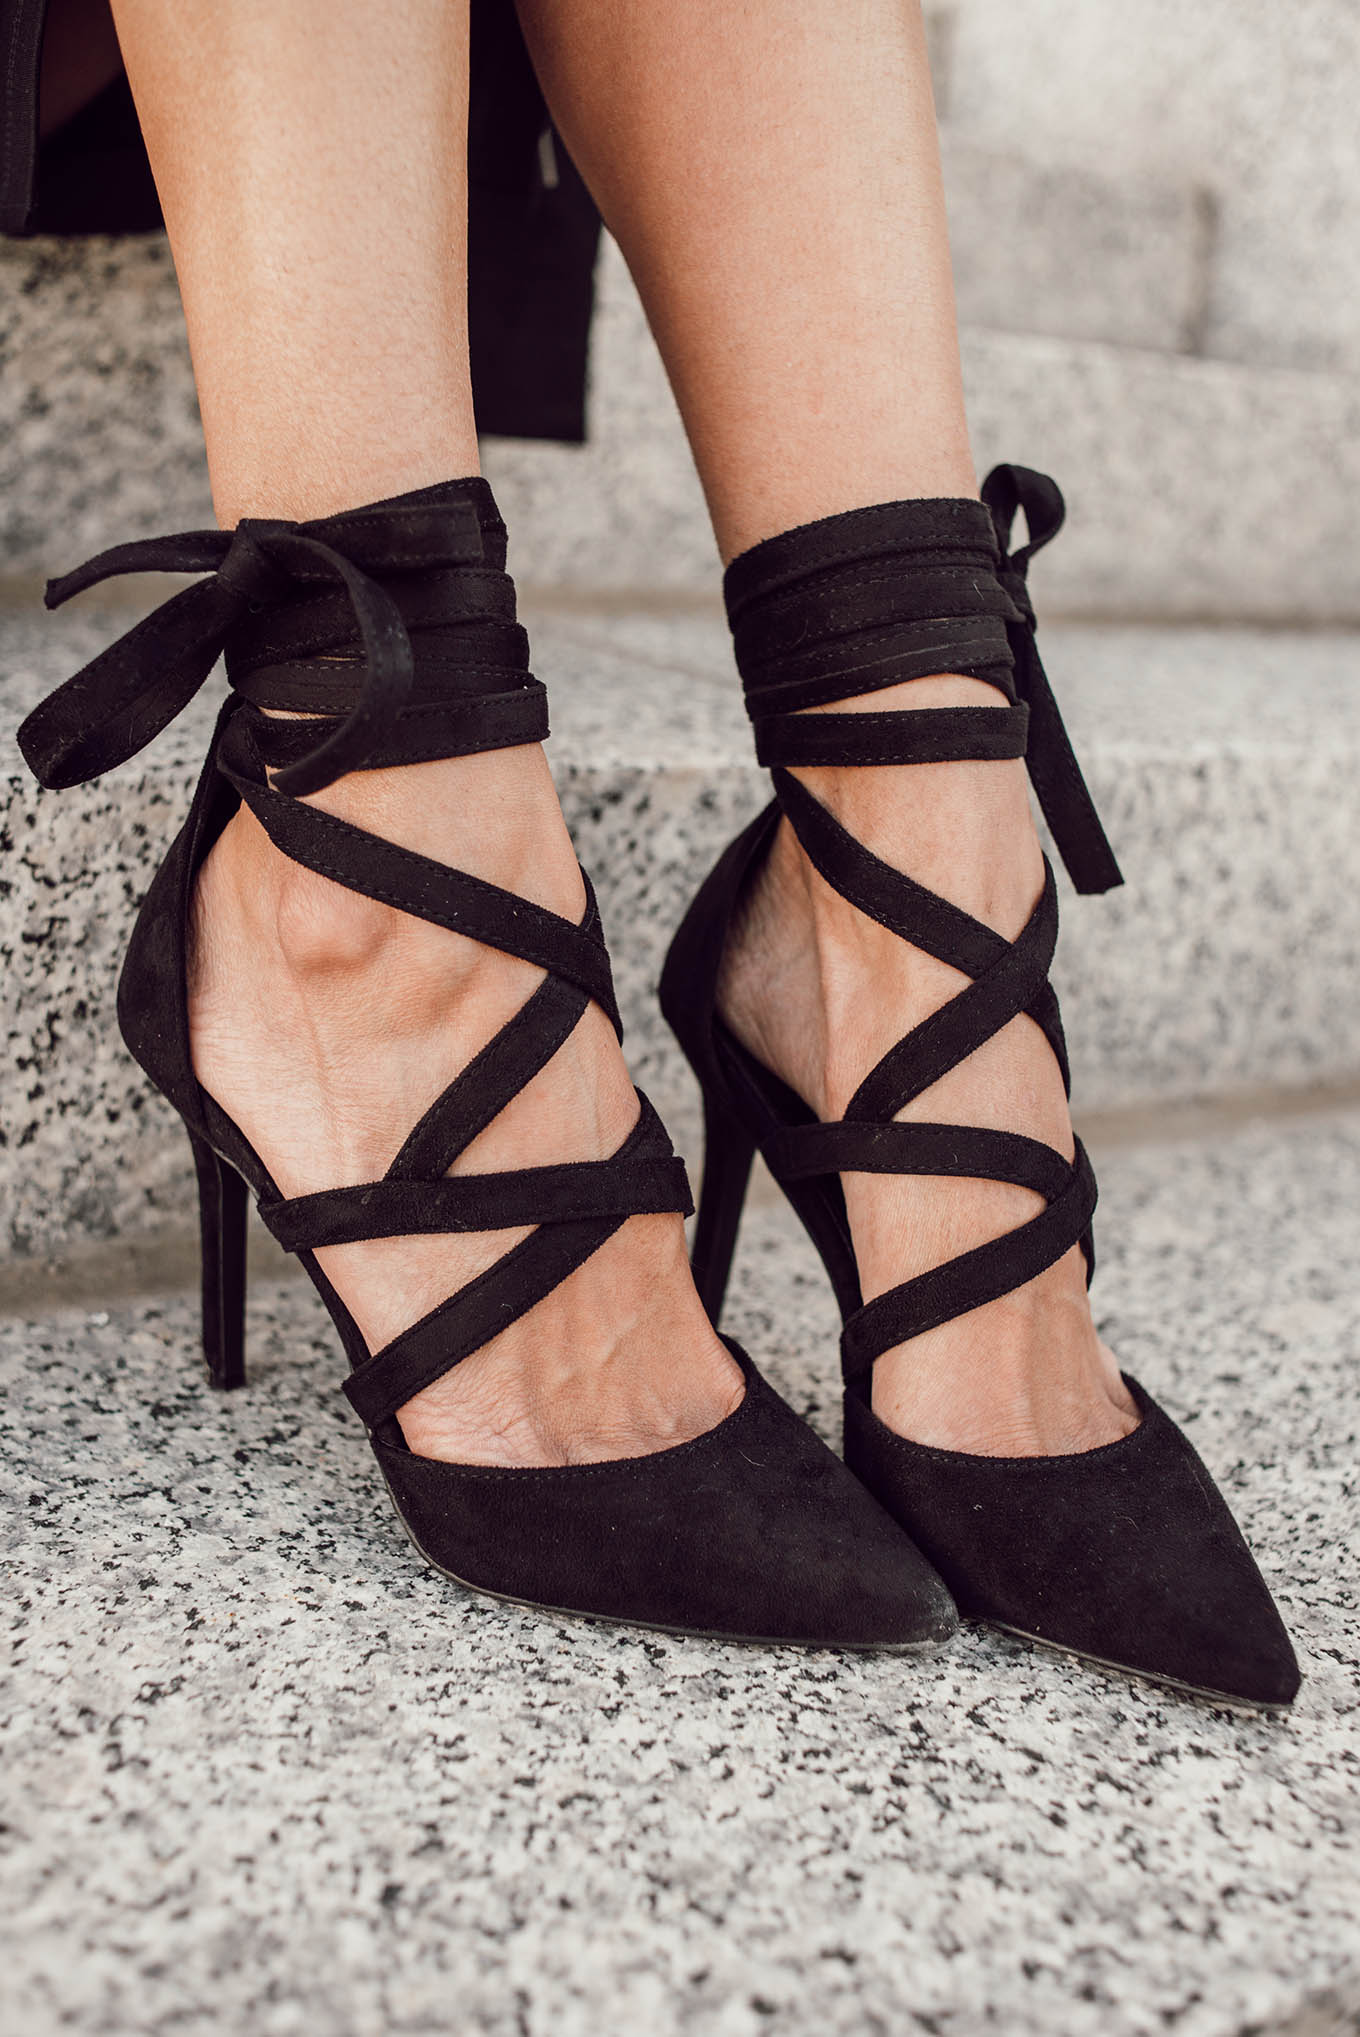 lace-up heels under $100